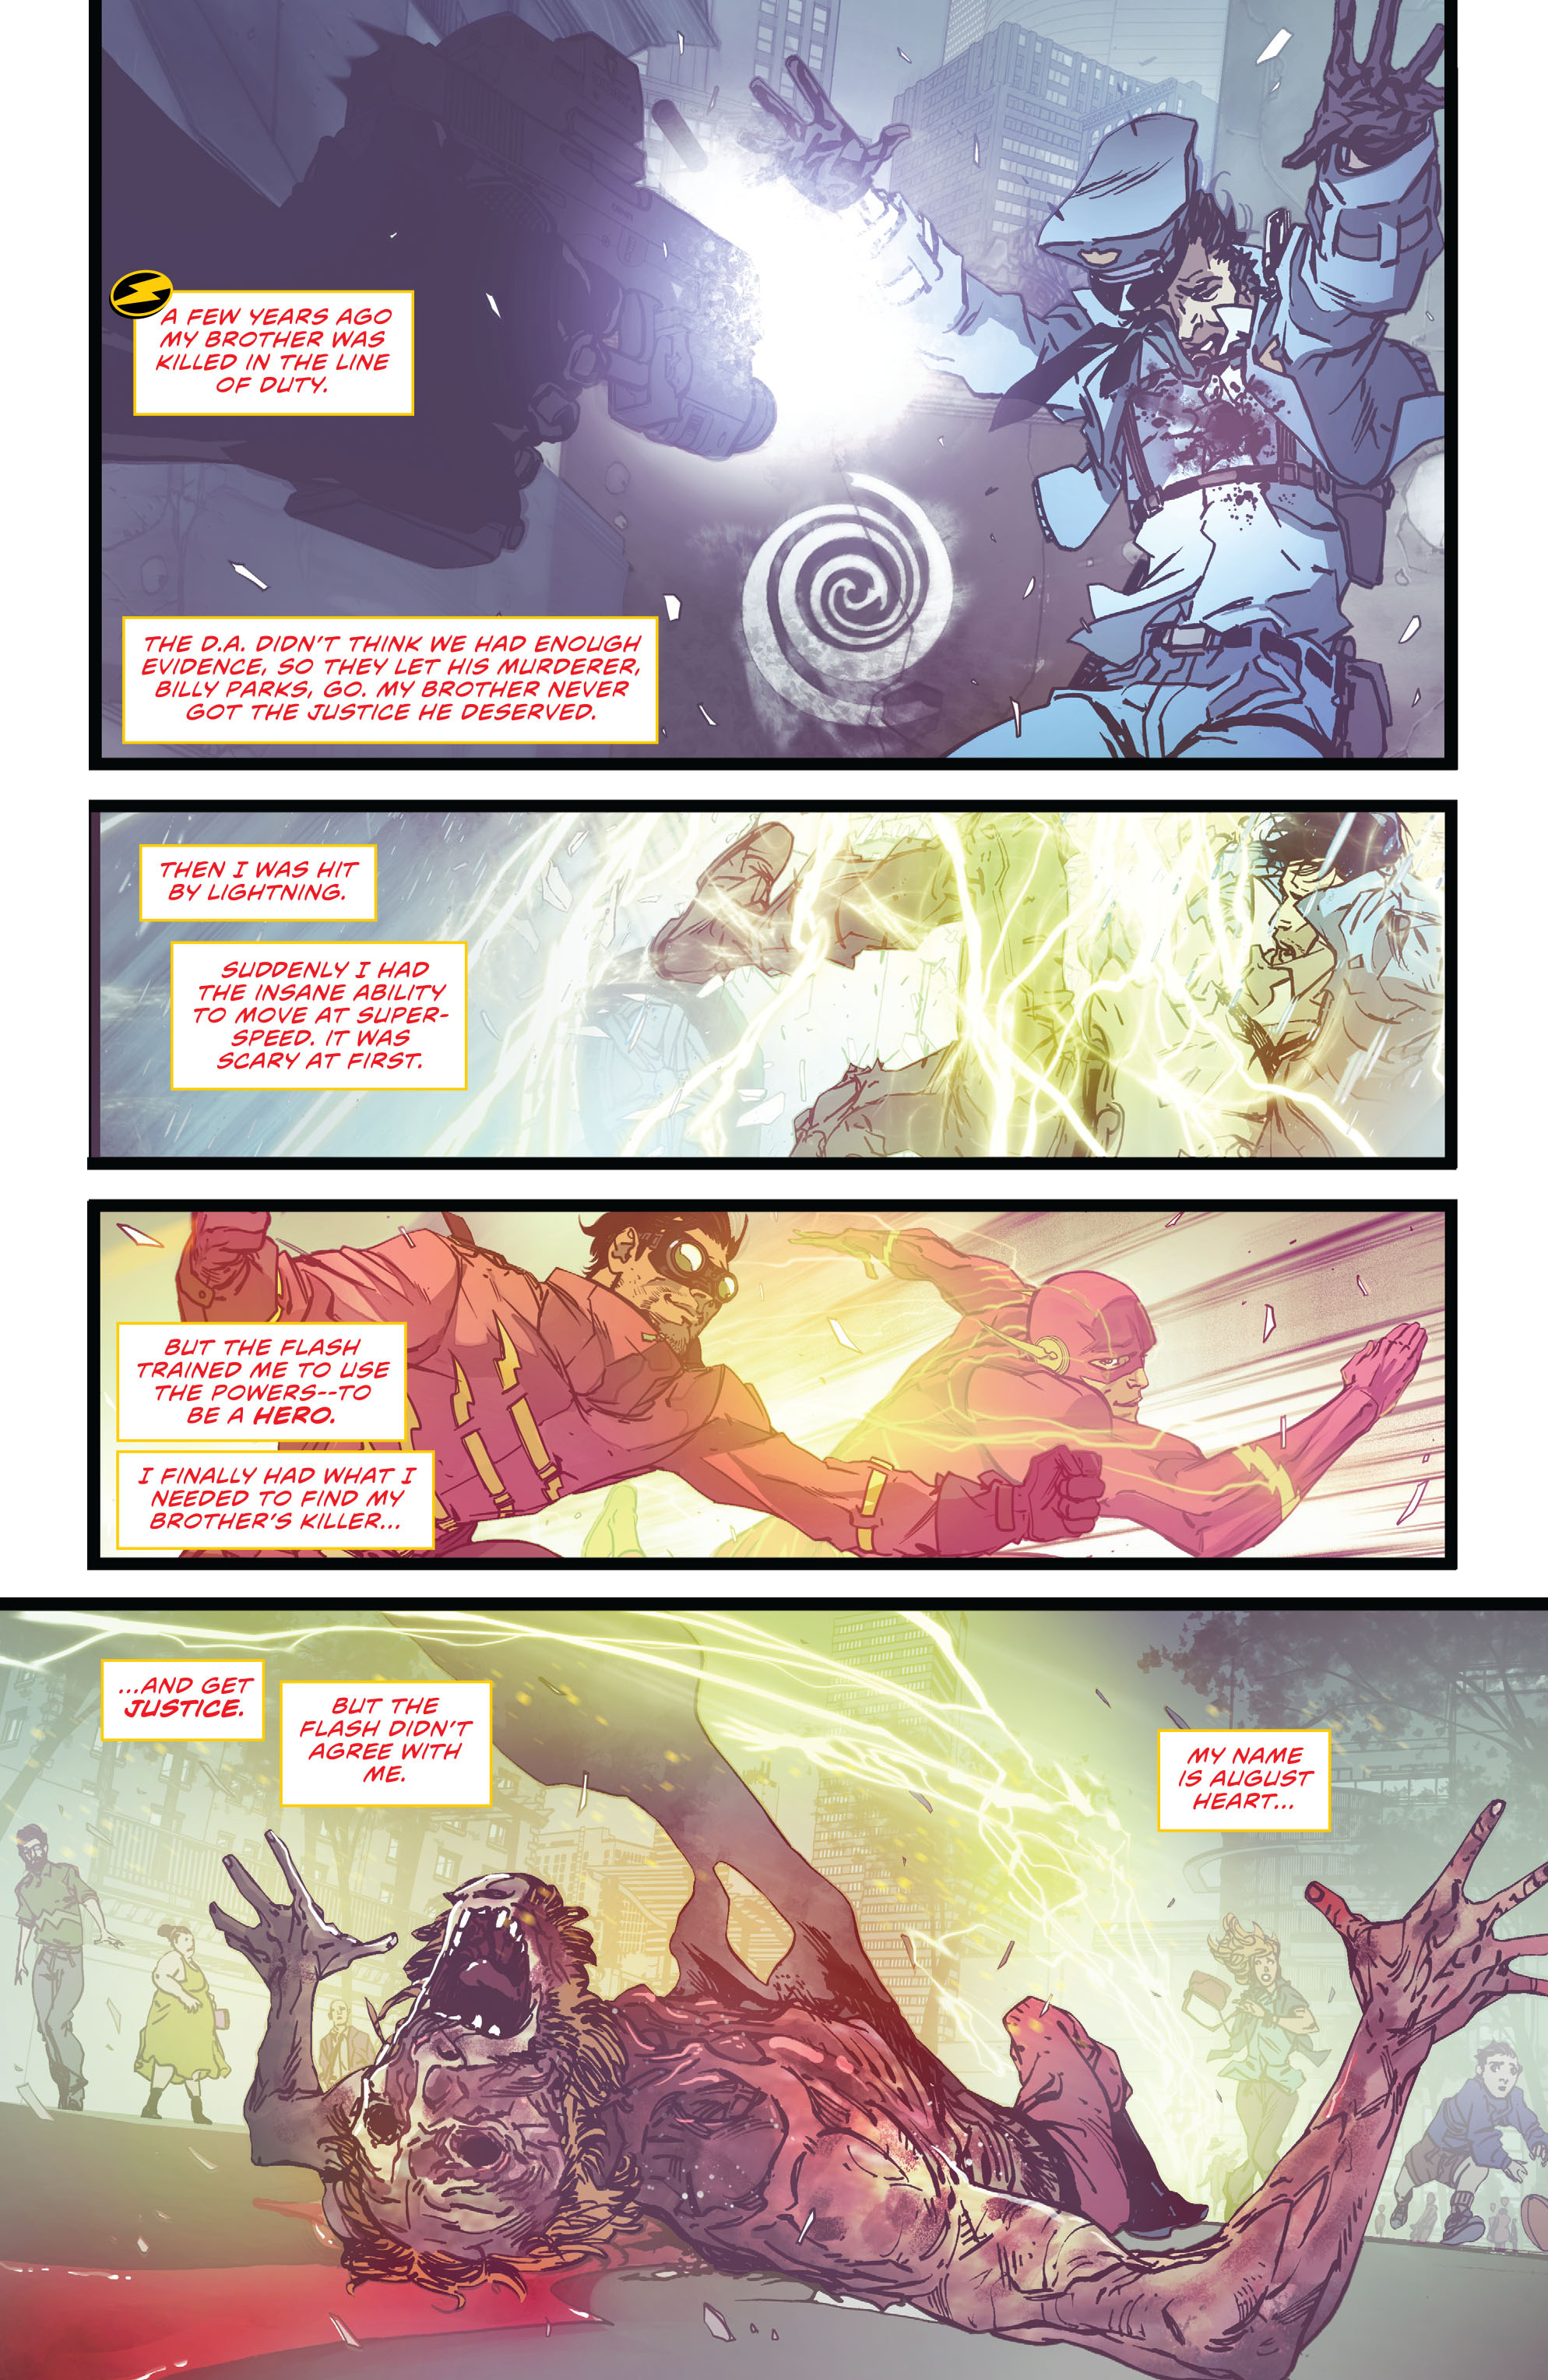 The Flash (2016-): Chapter 7 - Page 3